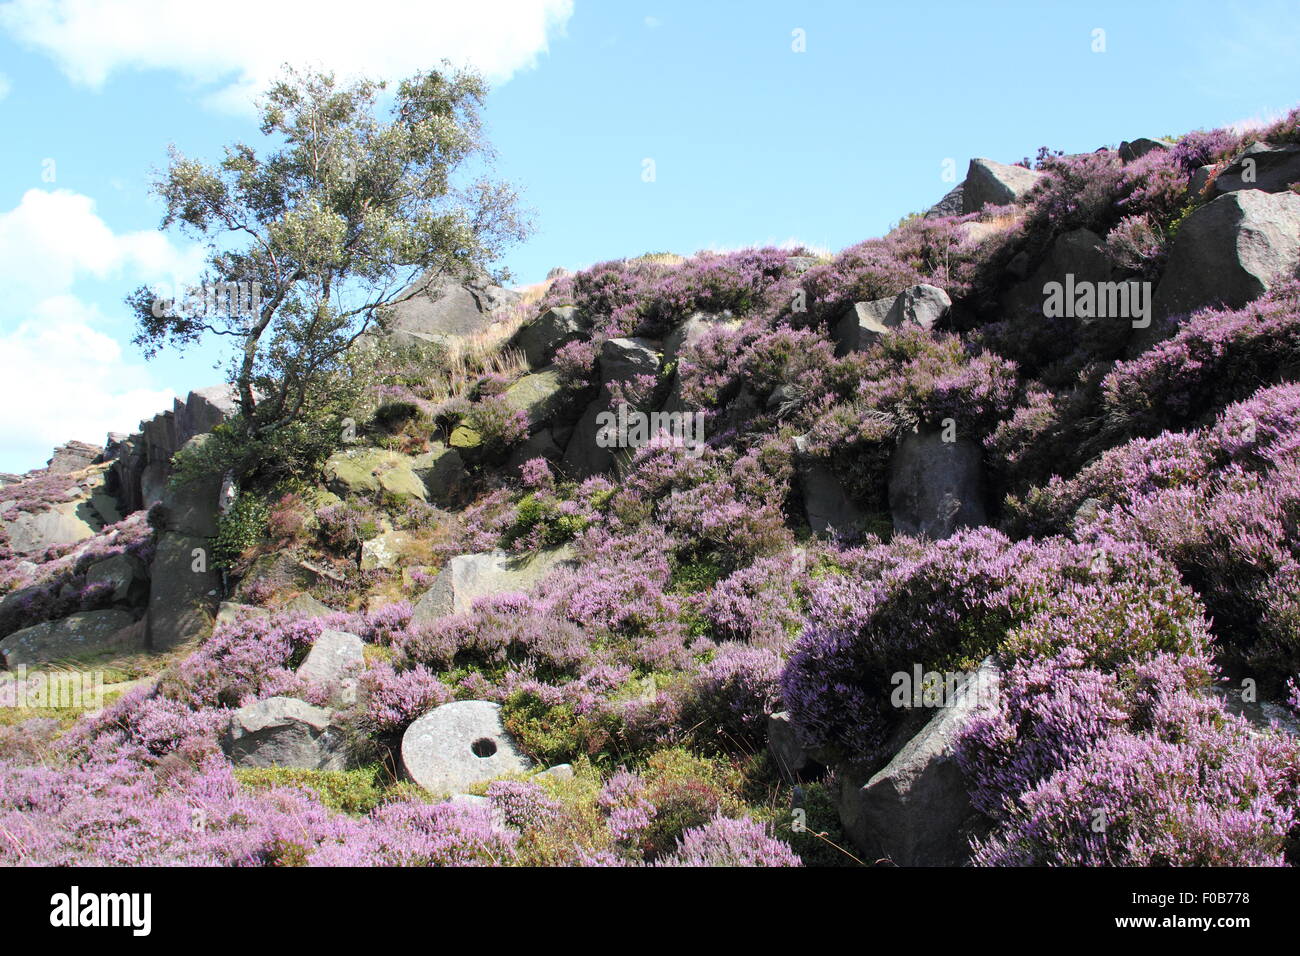 A tree grows by a abandoned millstone on heather moorland at Burbage Edge in the Peak District National Park, England UK Stock Photo